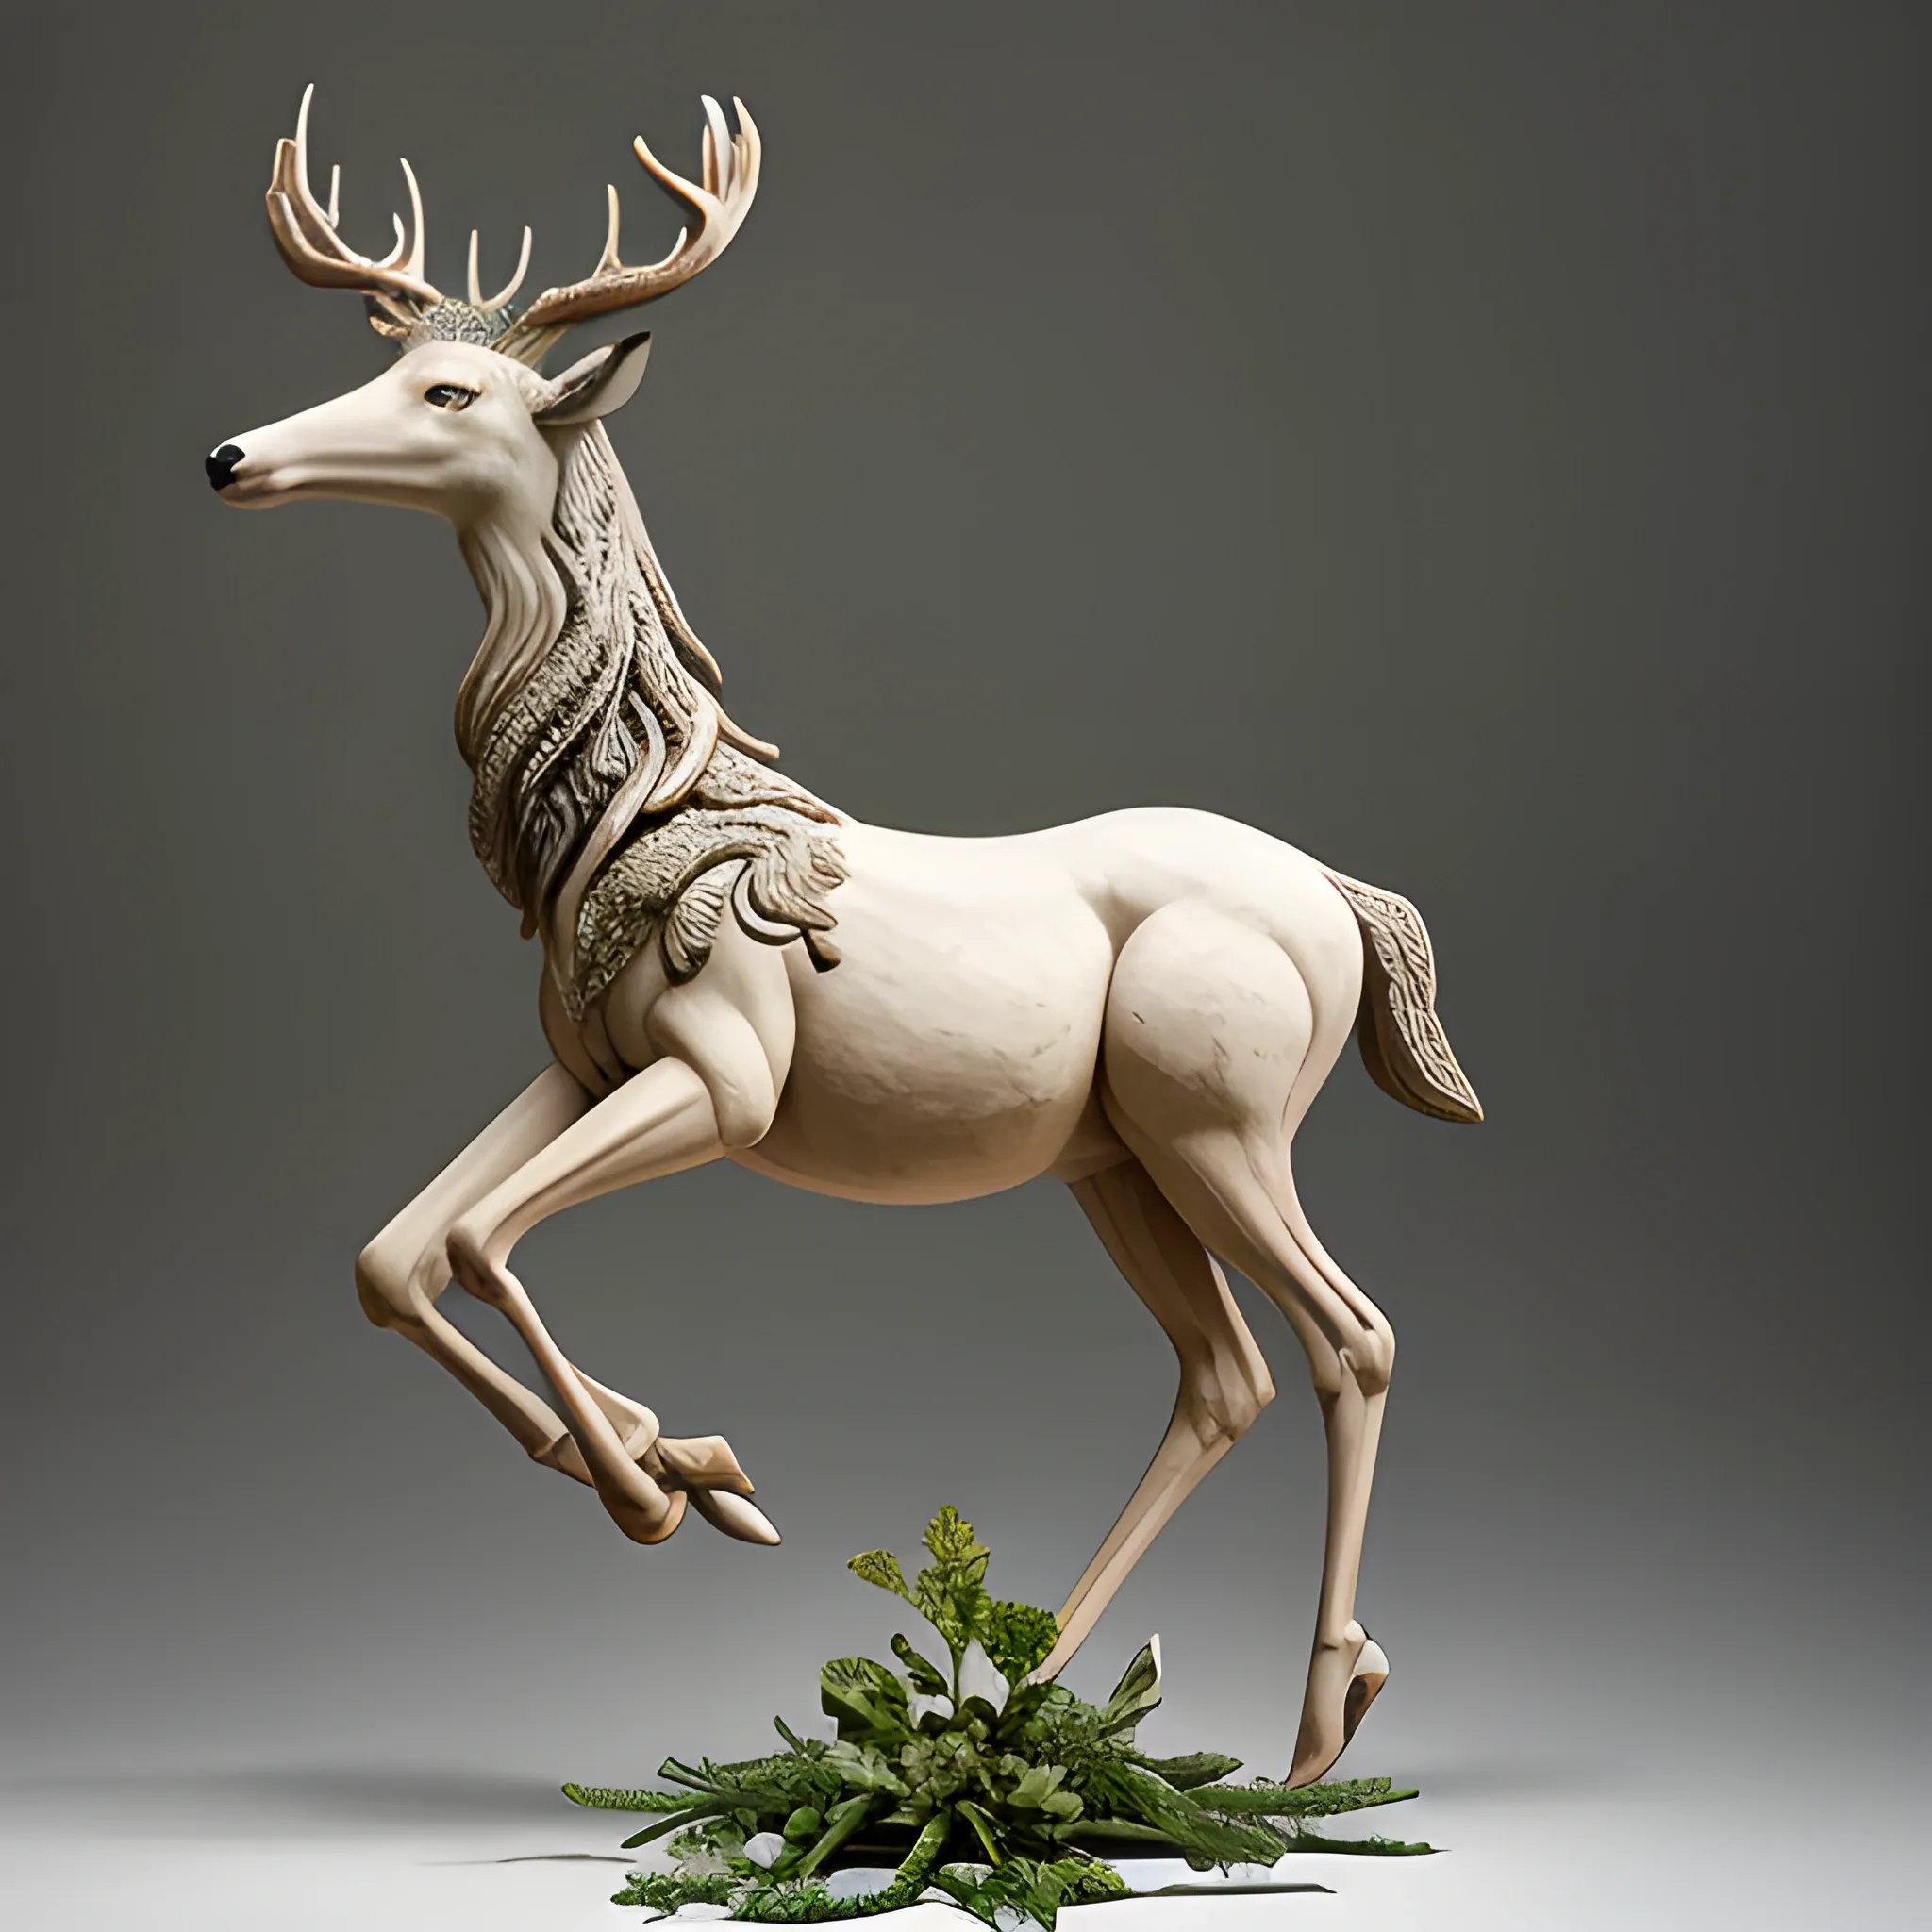 "A hyperrealistic and stylized sculpture that represents a female goddess of deer and plants, mounted on a creature that fuses the elegance of the deer with the strength of the horse, created by a prodigious contemporary sculptor of the 21st century."